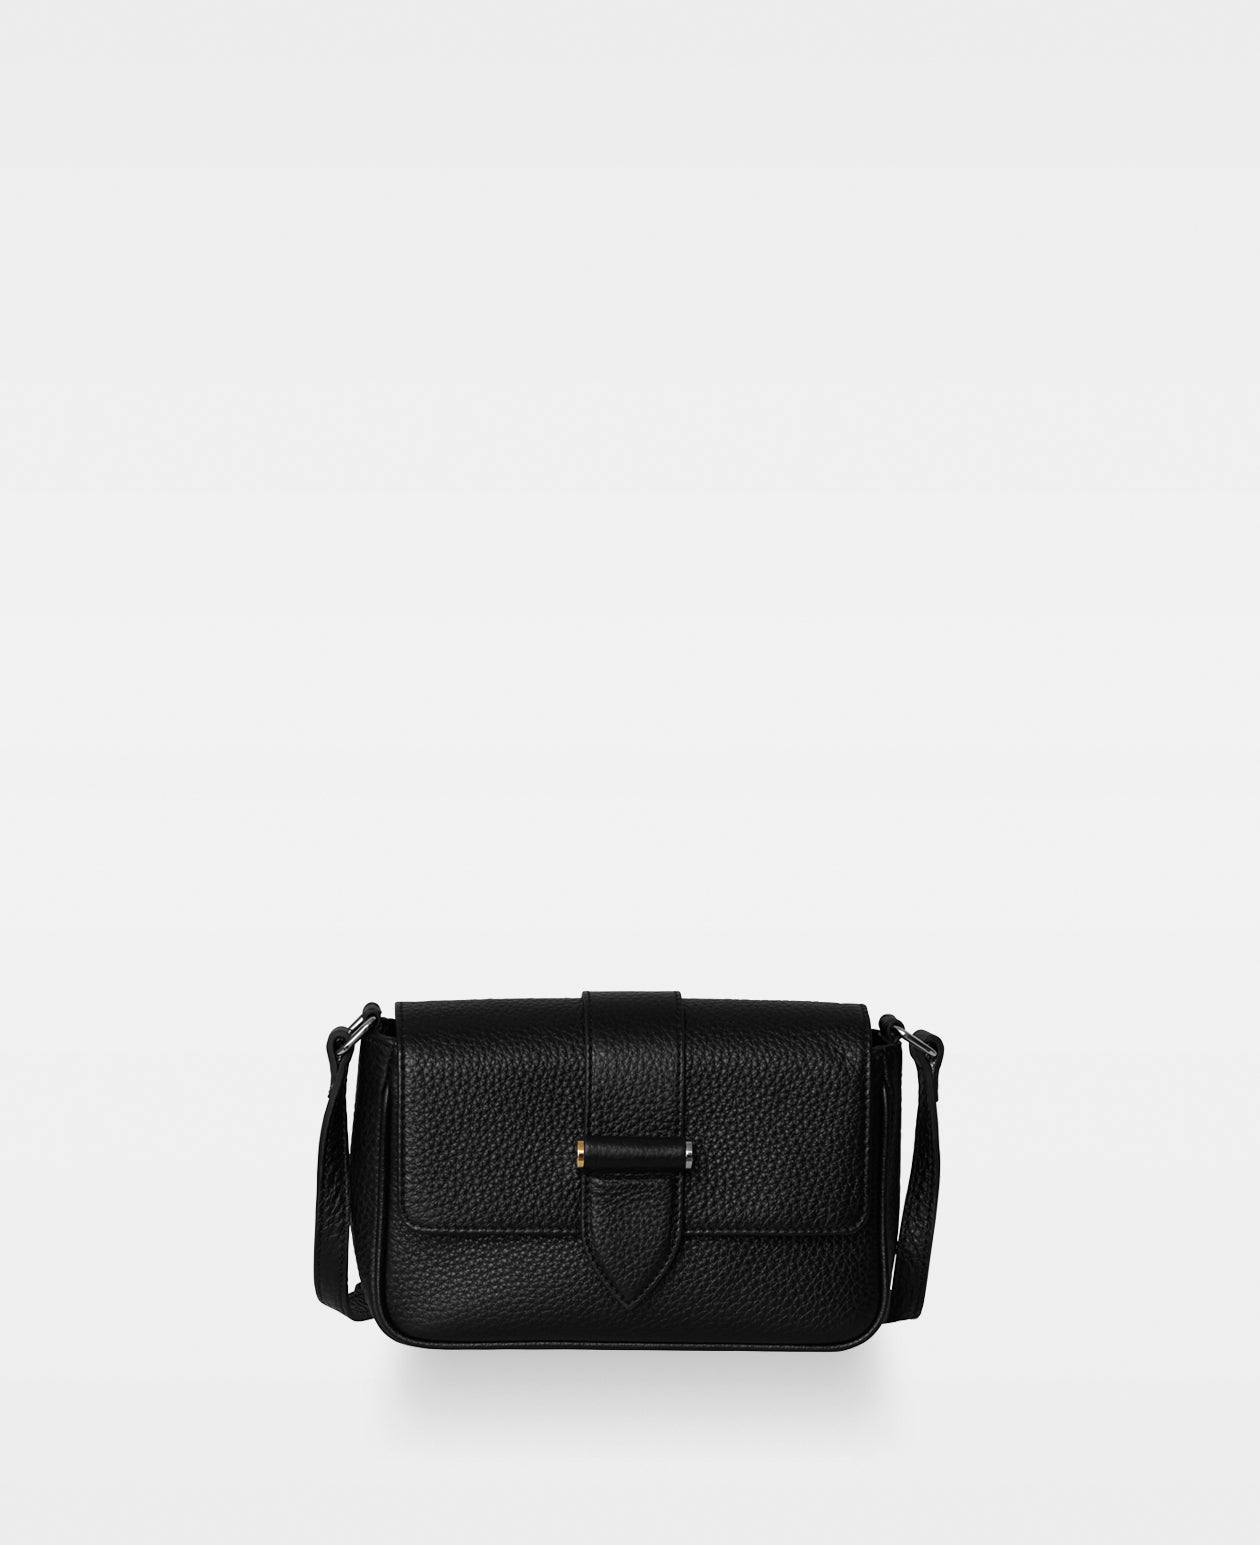 The Perfect Copenhagen Bag - Swanky and Bold